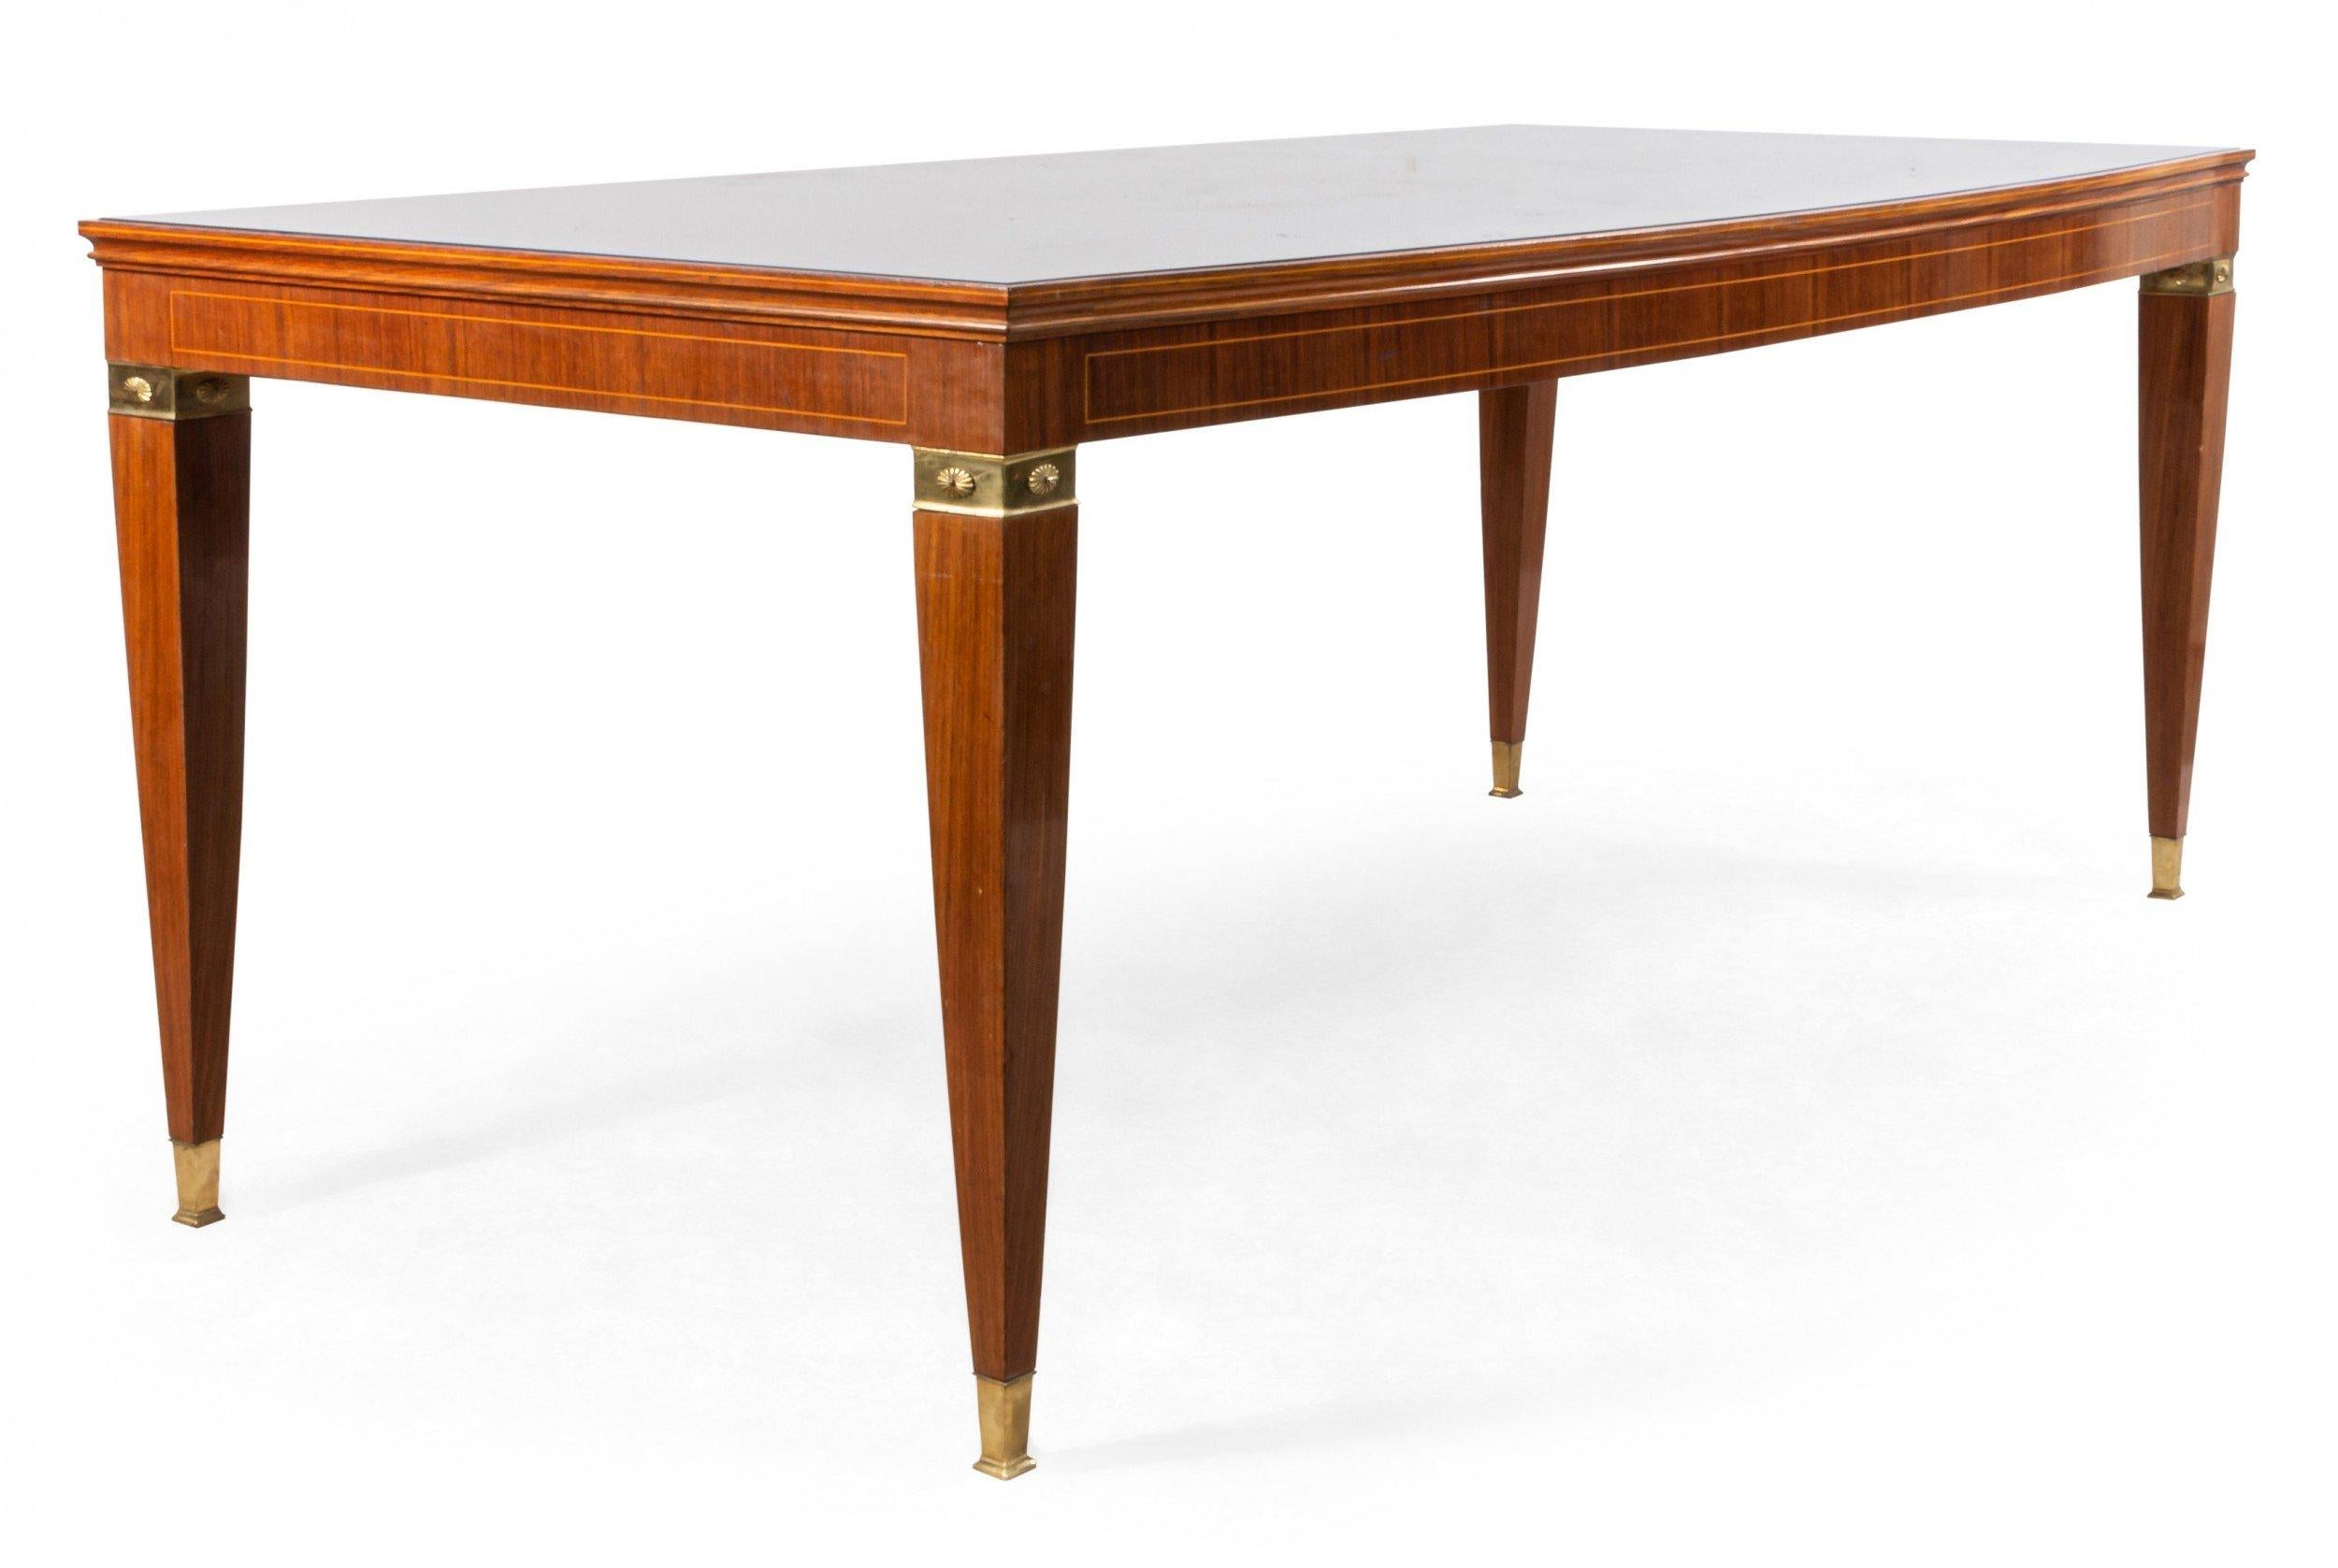 Italian midcentury dining table with wood construction, red glass top, and bronze mounted legs (attributed to Paulo Buffa for Serafino Arrighi).